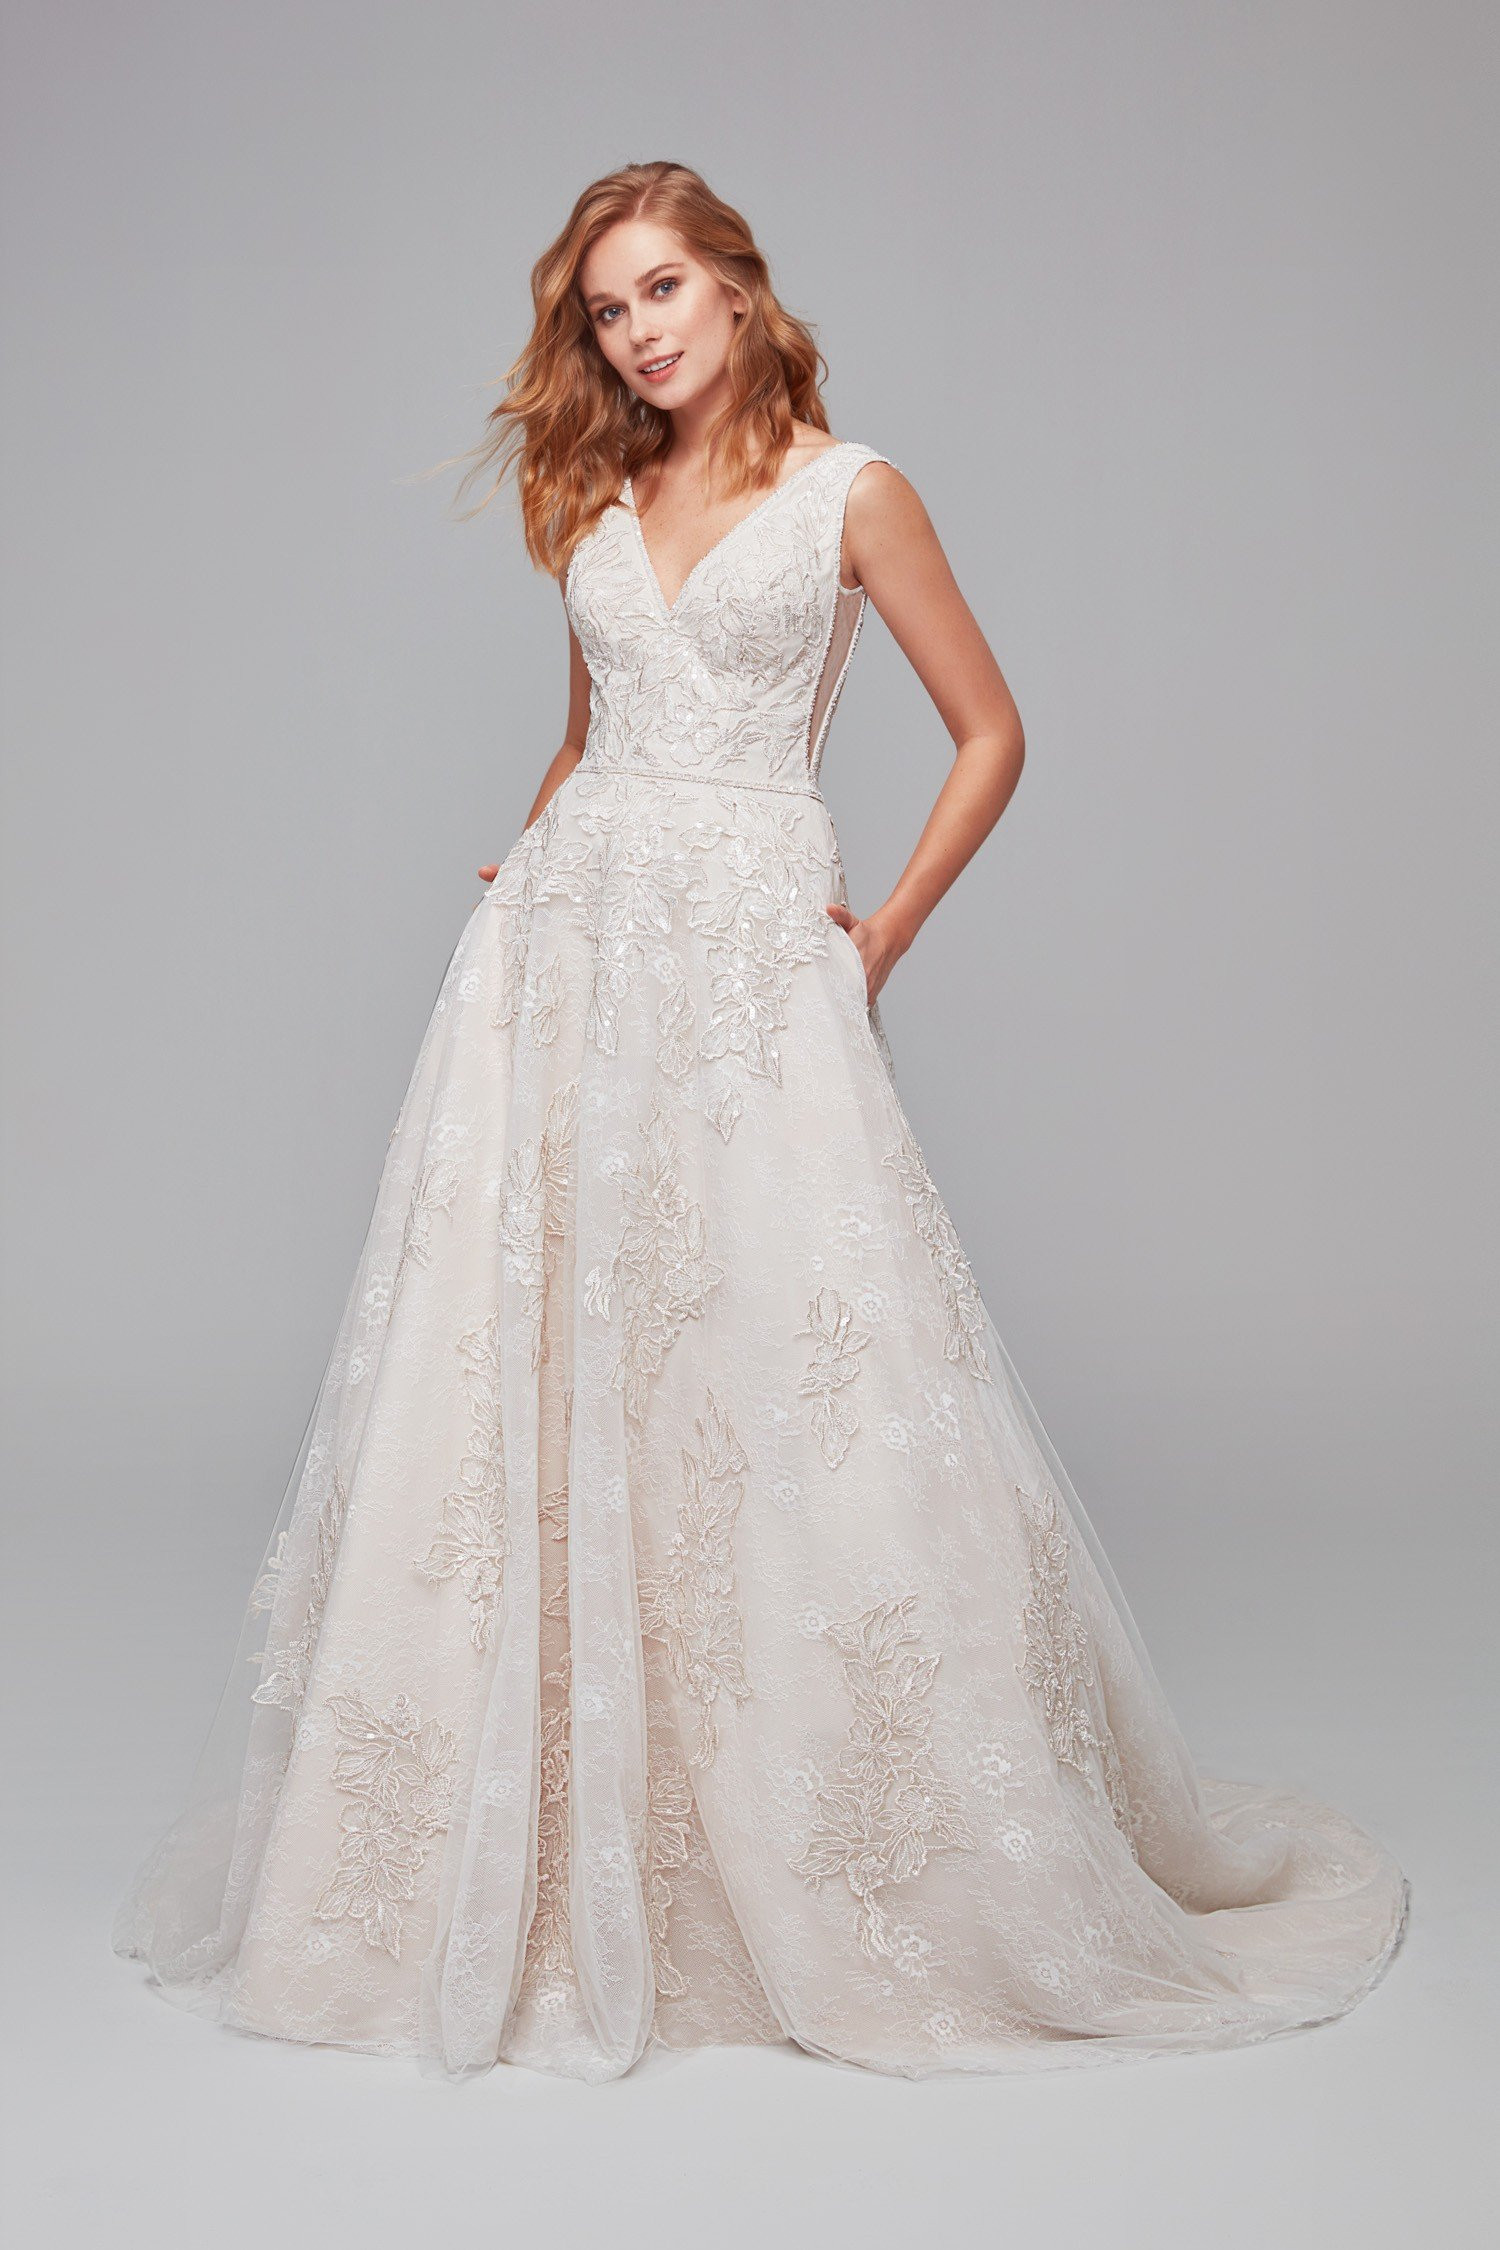 A Line Lace Wedding Dress
 Appliqued Tulle Over Lace A Line Wedding Dress CWG792